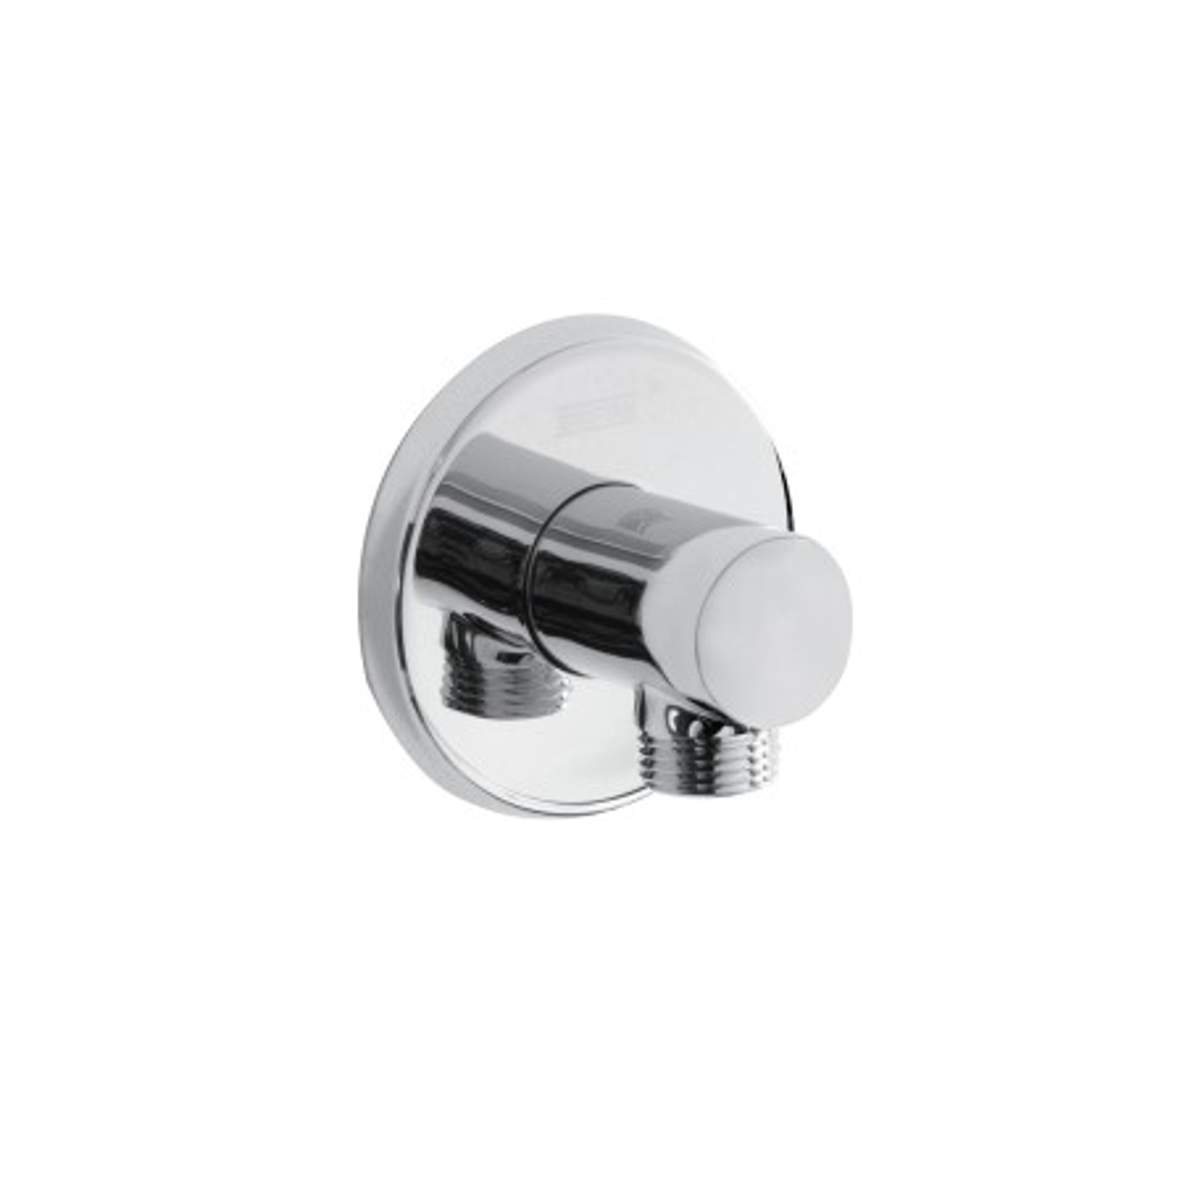 Bristan Round Wall Outlet (CARM WORD01 C)